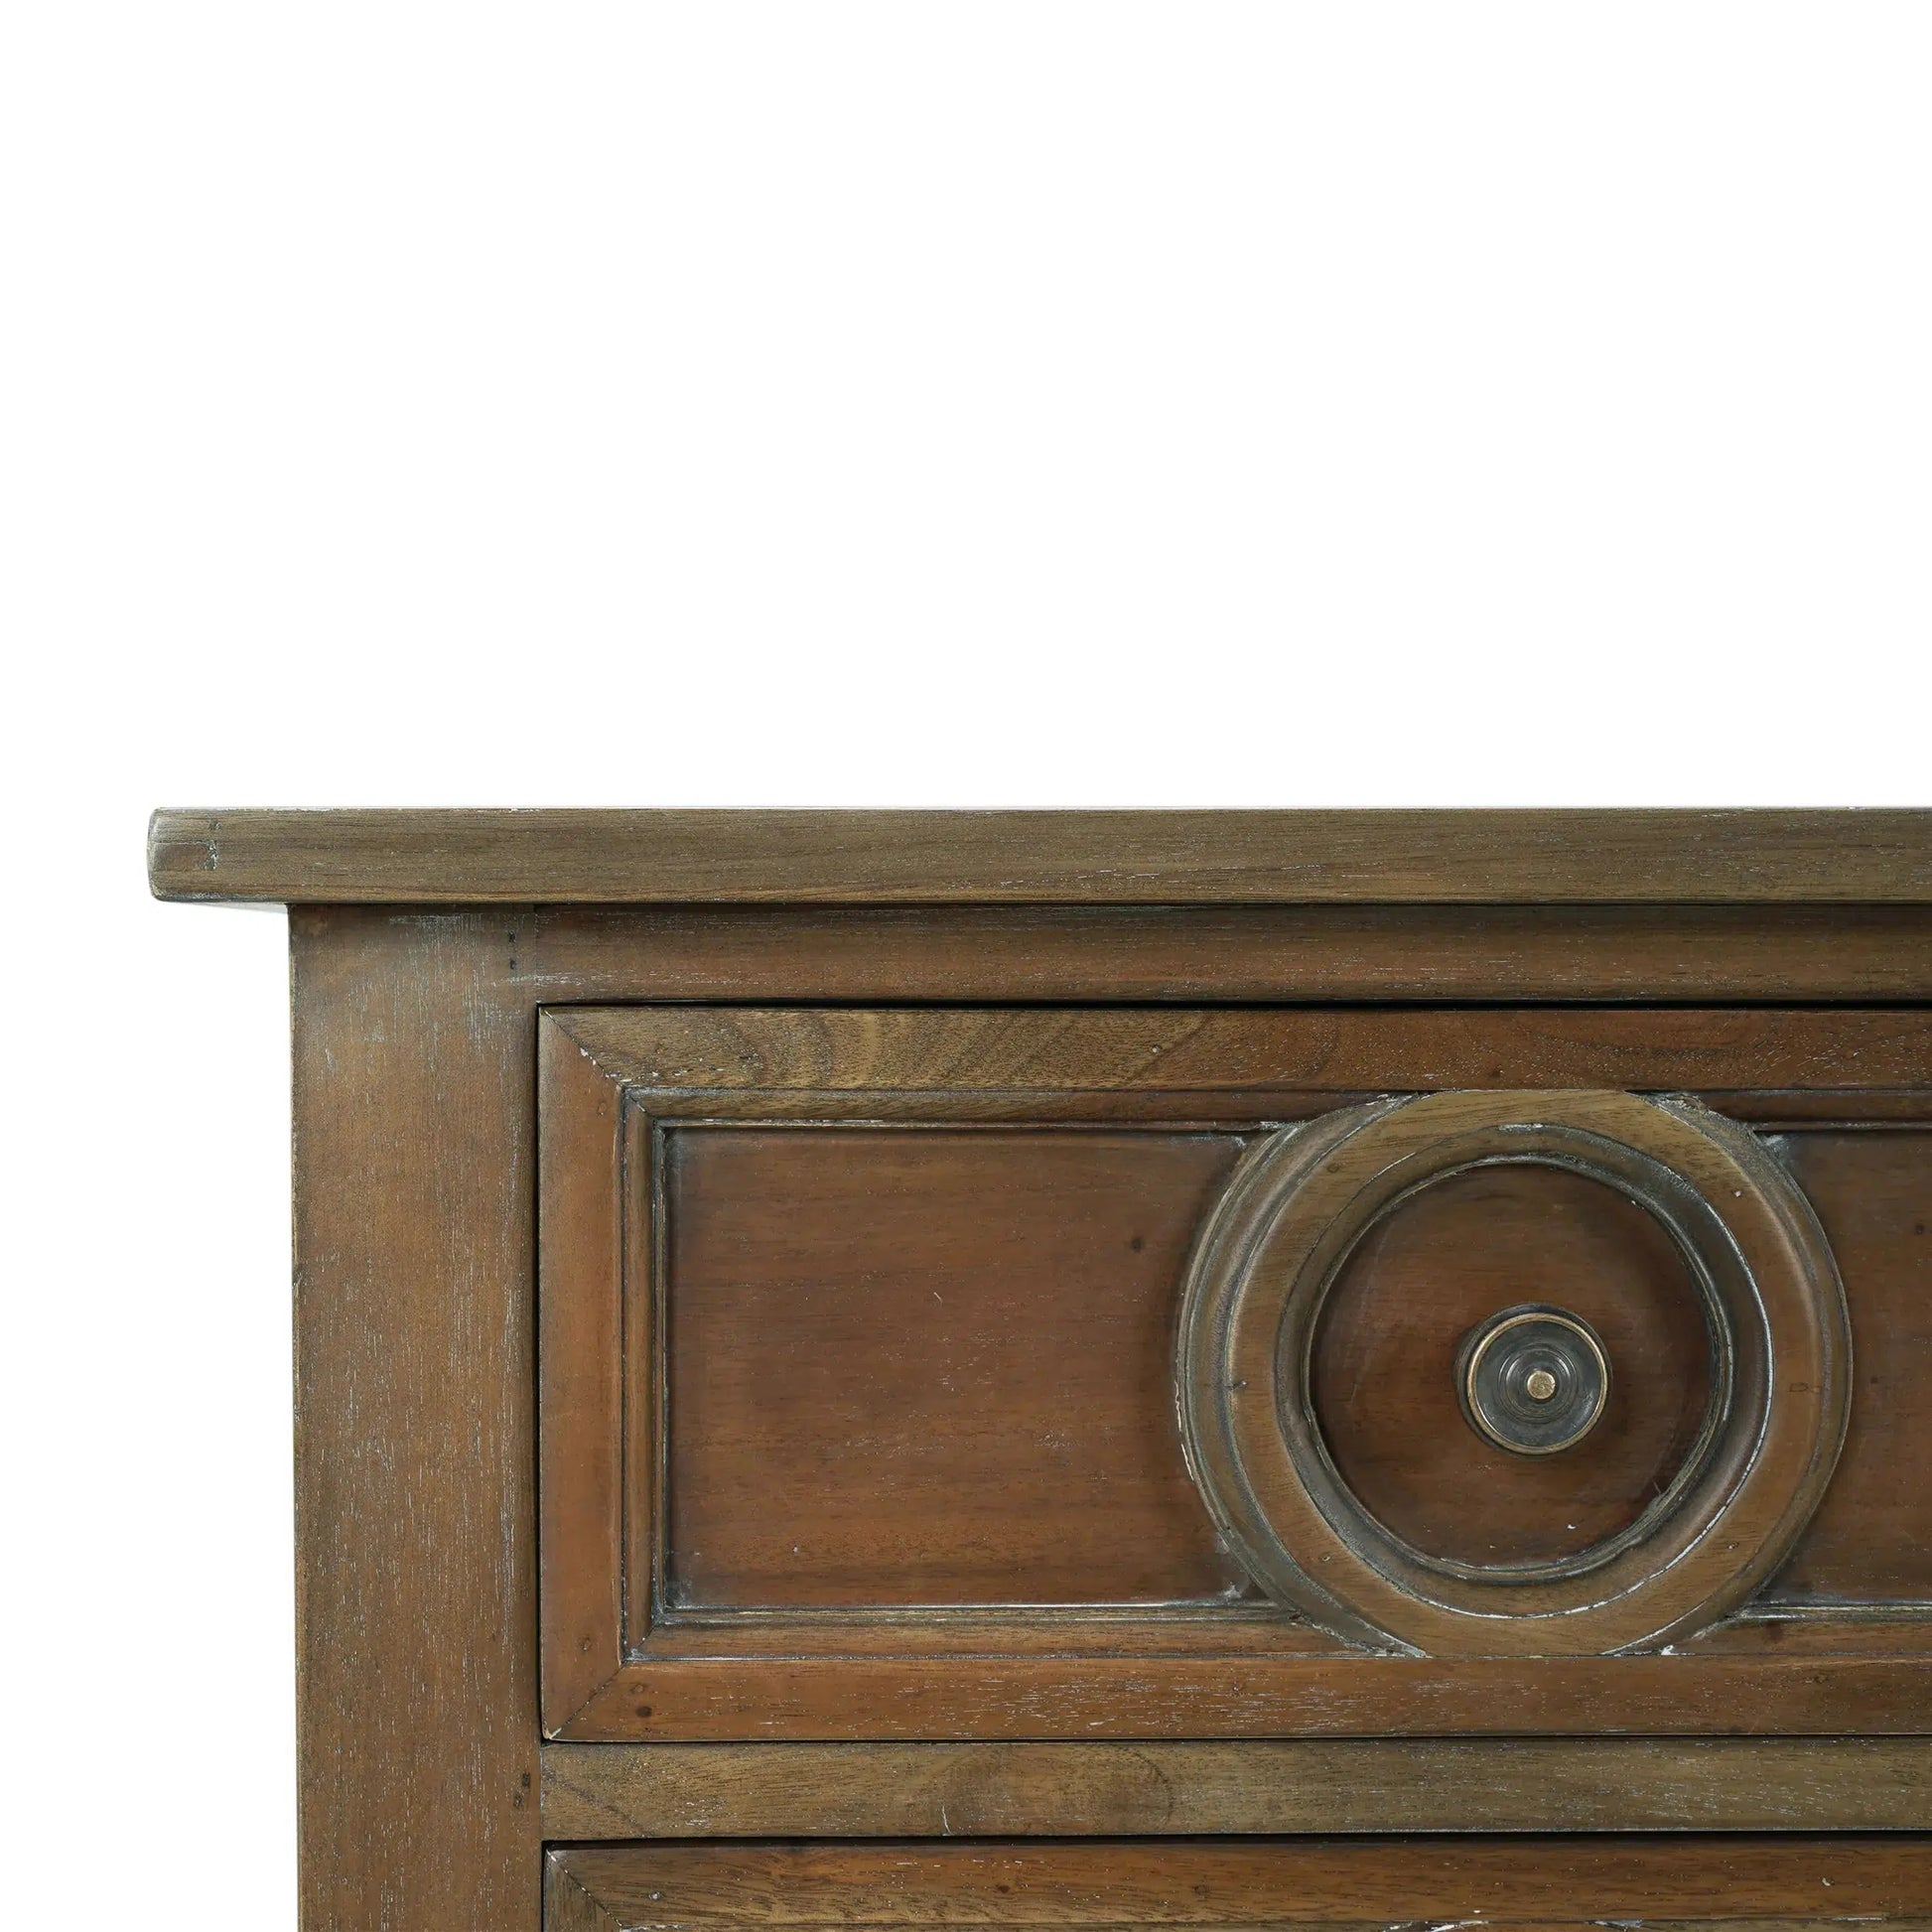 Orleans Console Table In Straw Wash-Blue Hand Home